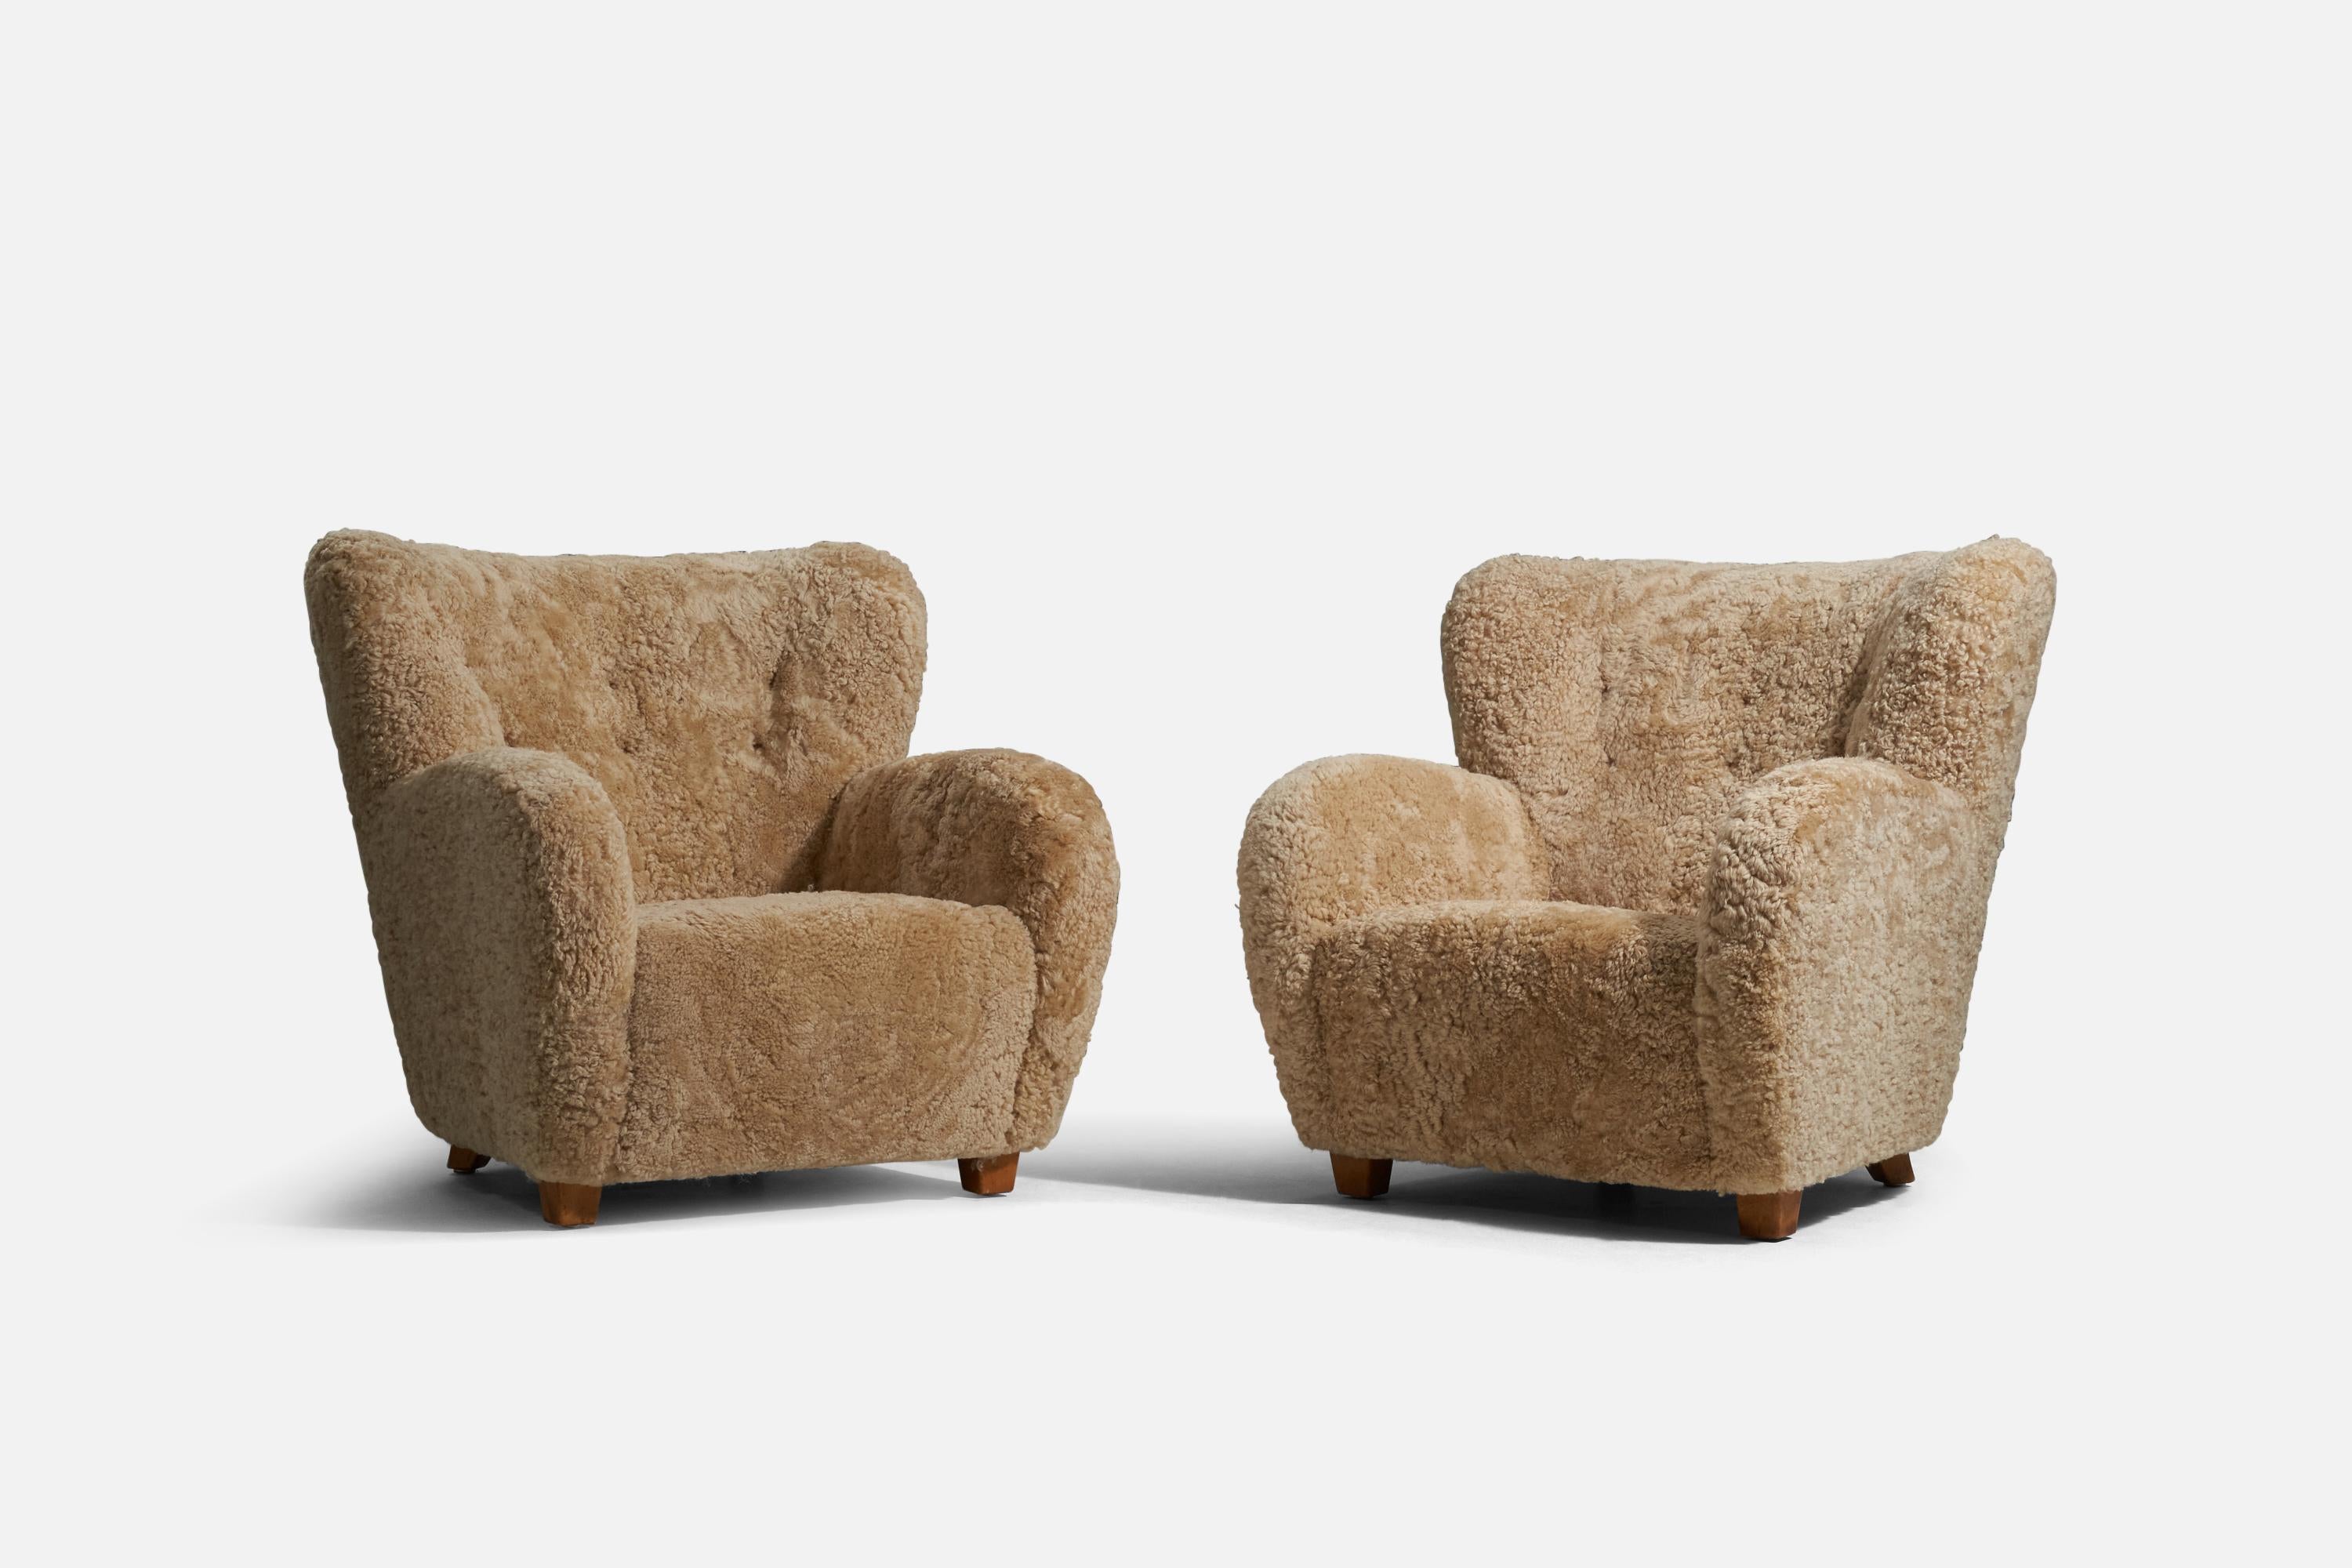 A pair of shearling and beech lounge chairs designed and produced by a Finnish designer, Finland, 1940s.